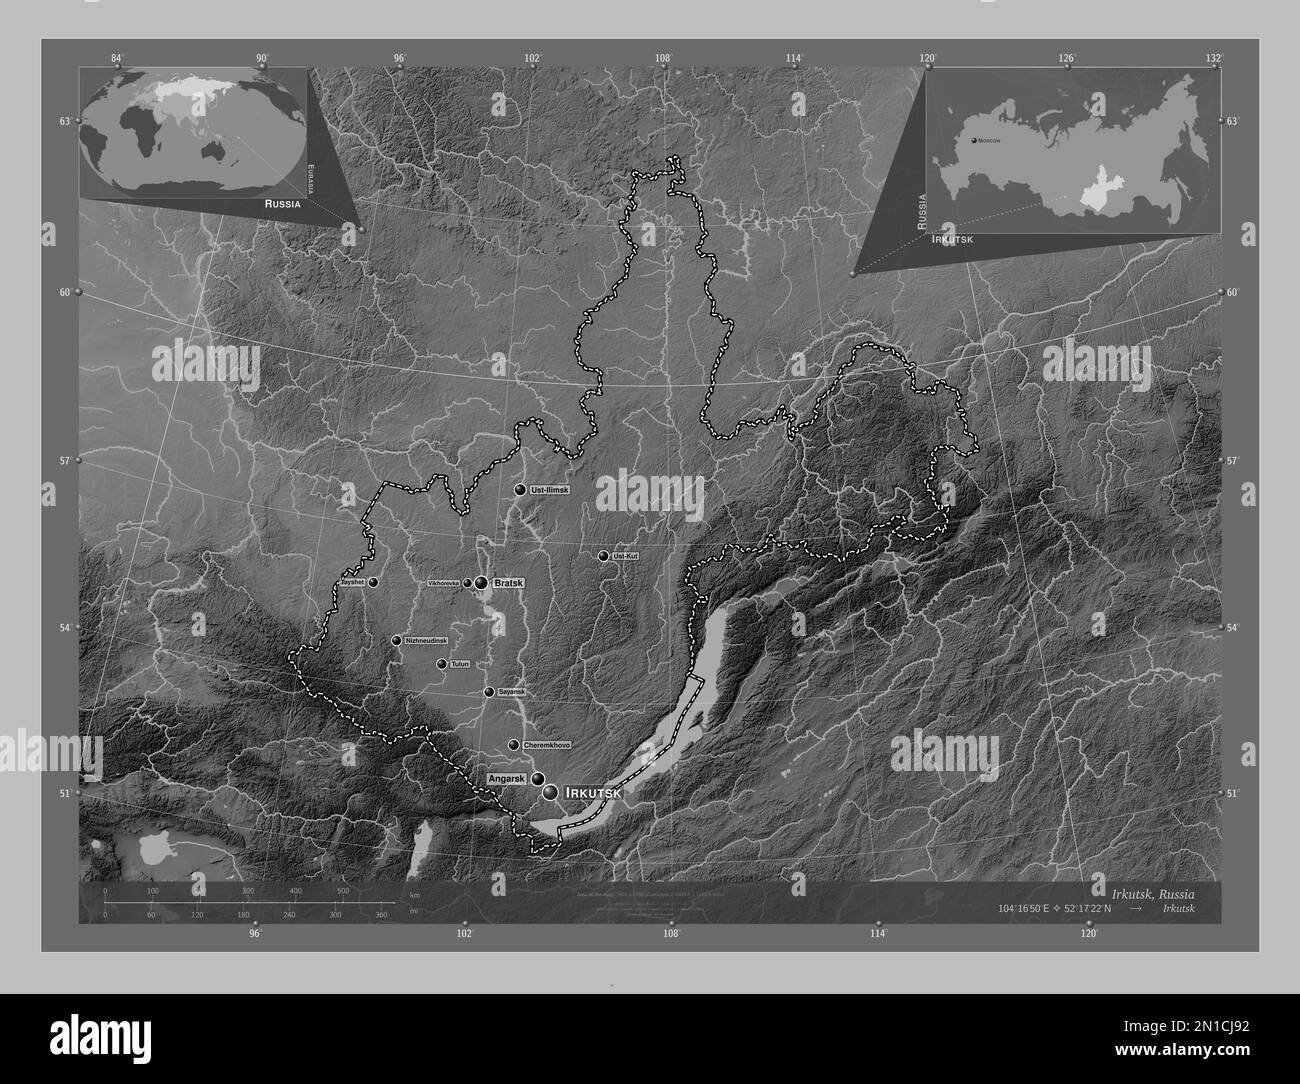 Irkutsk, region of Russia. Grayscale elevation map with lakes and rivers. Locations and names of major cities of the region. Corner auxiliary location Stock Photo